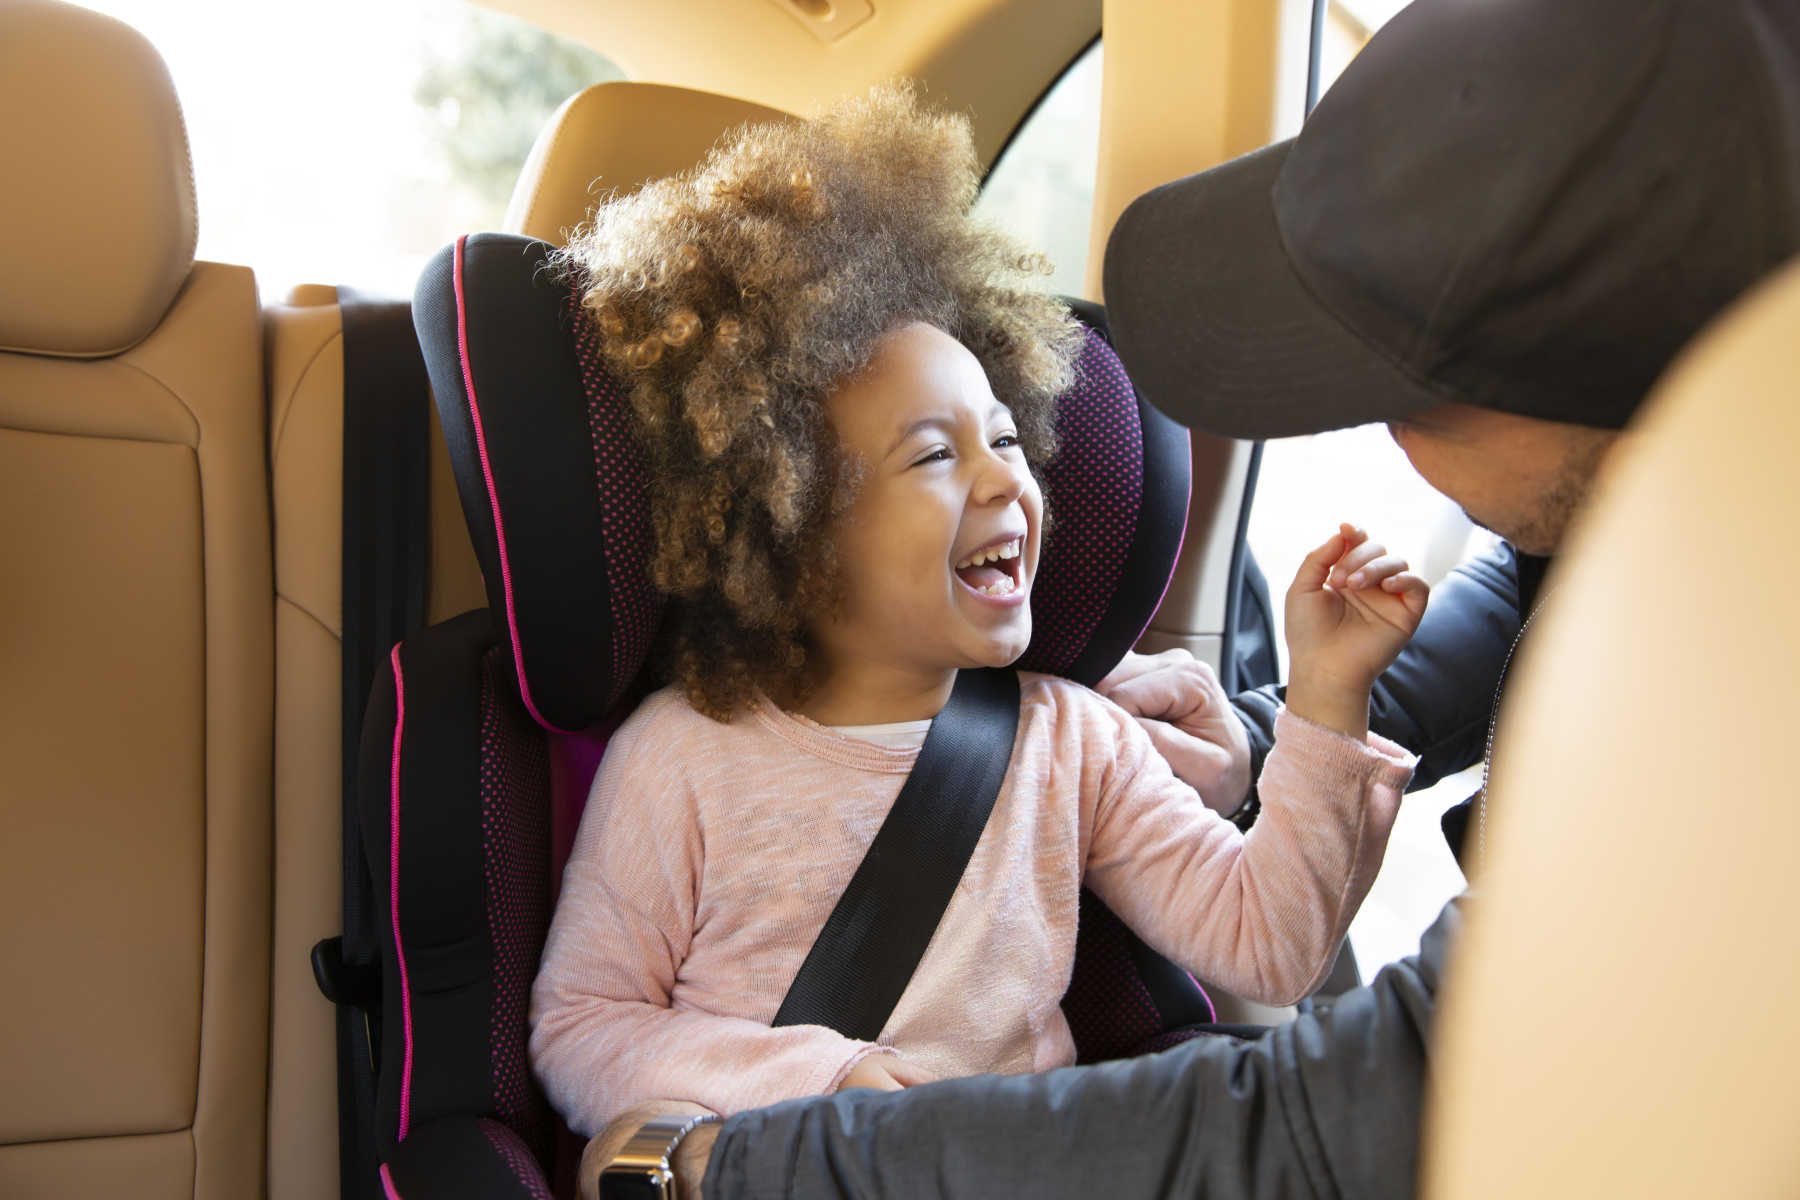 The Best Car Seats For 4 Year Olds, Does 4 Year Old Need Car Seat